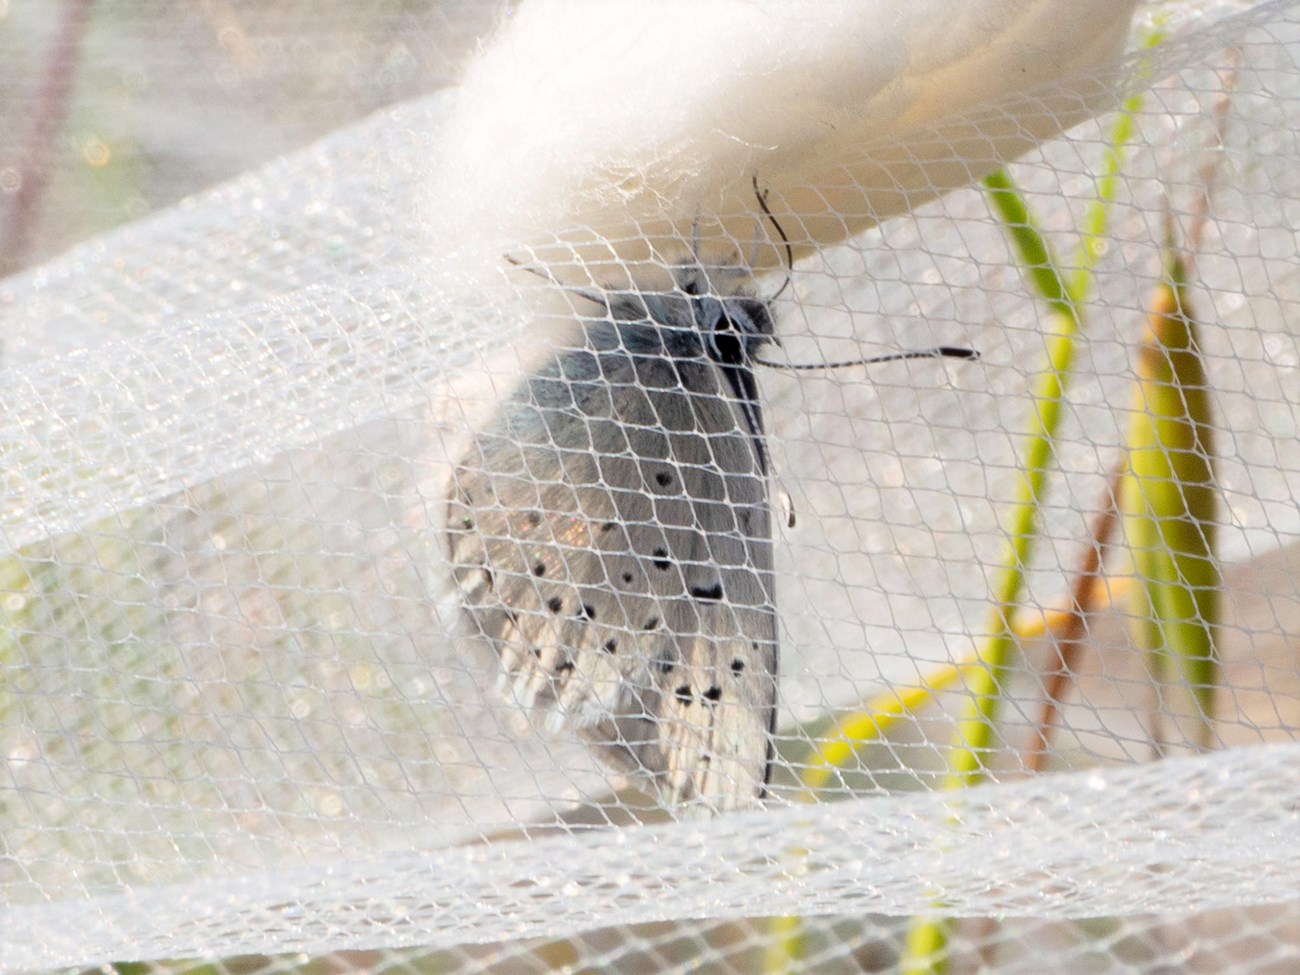 A small butterfly sips a sugar water solution from a cotton ball from within a white net.